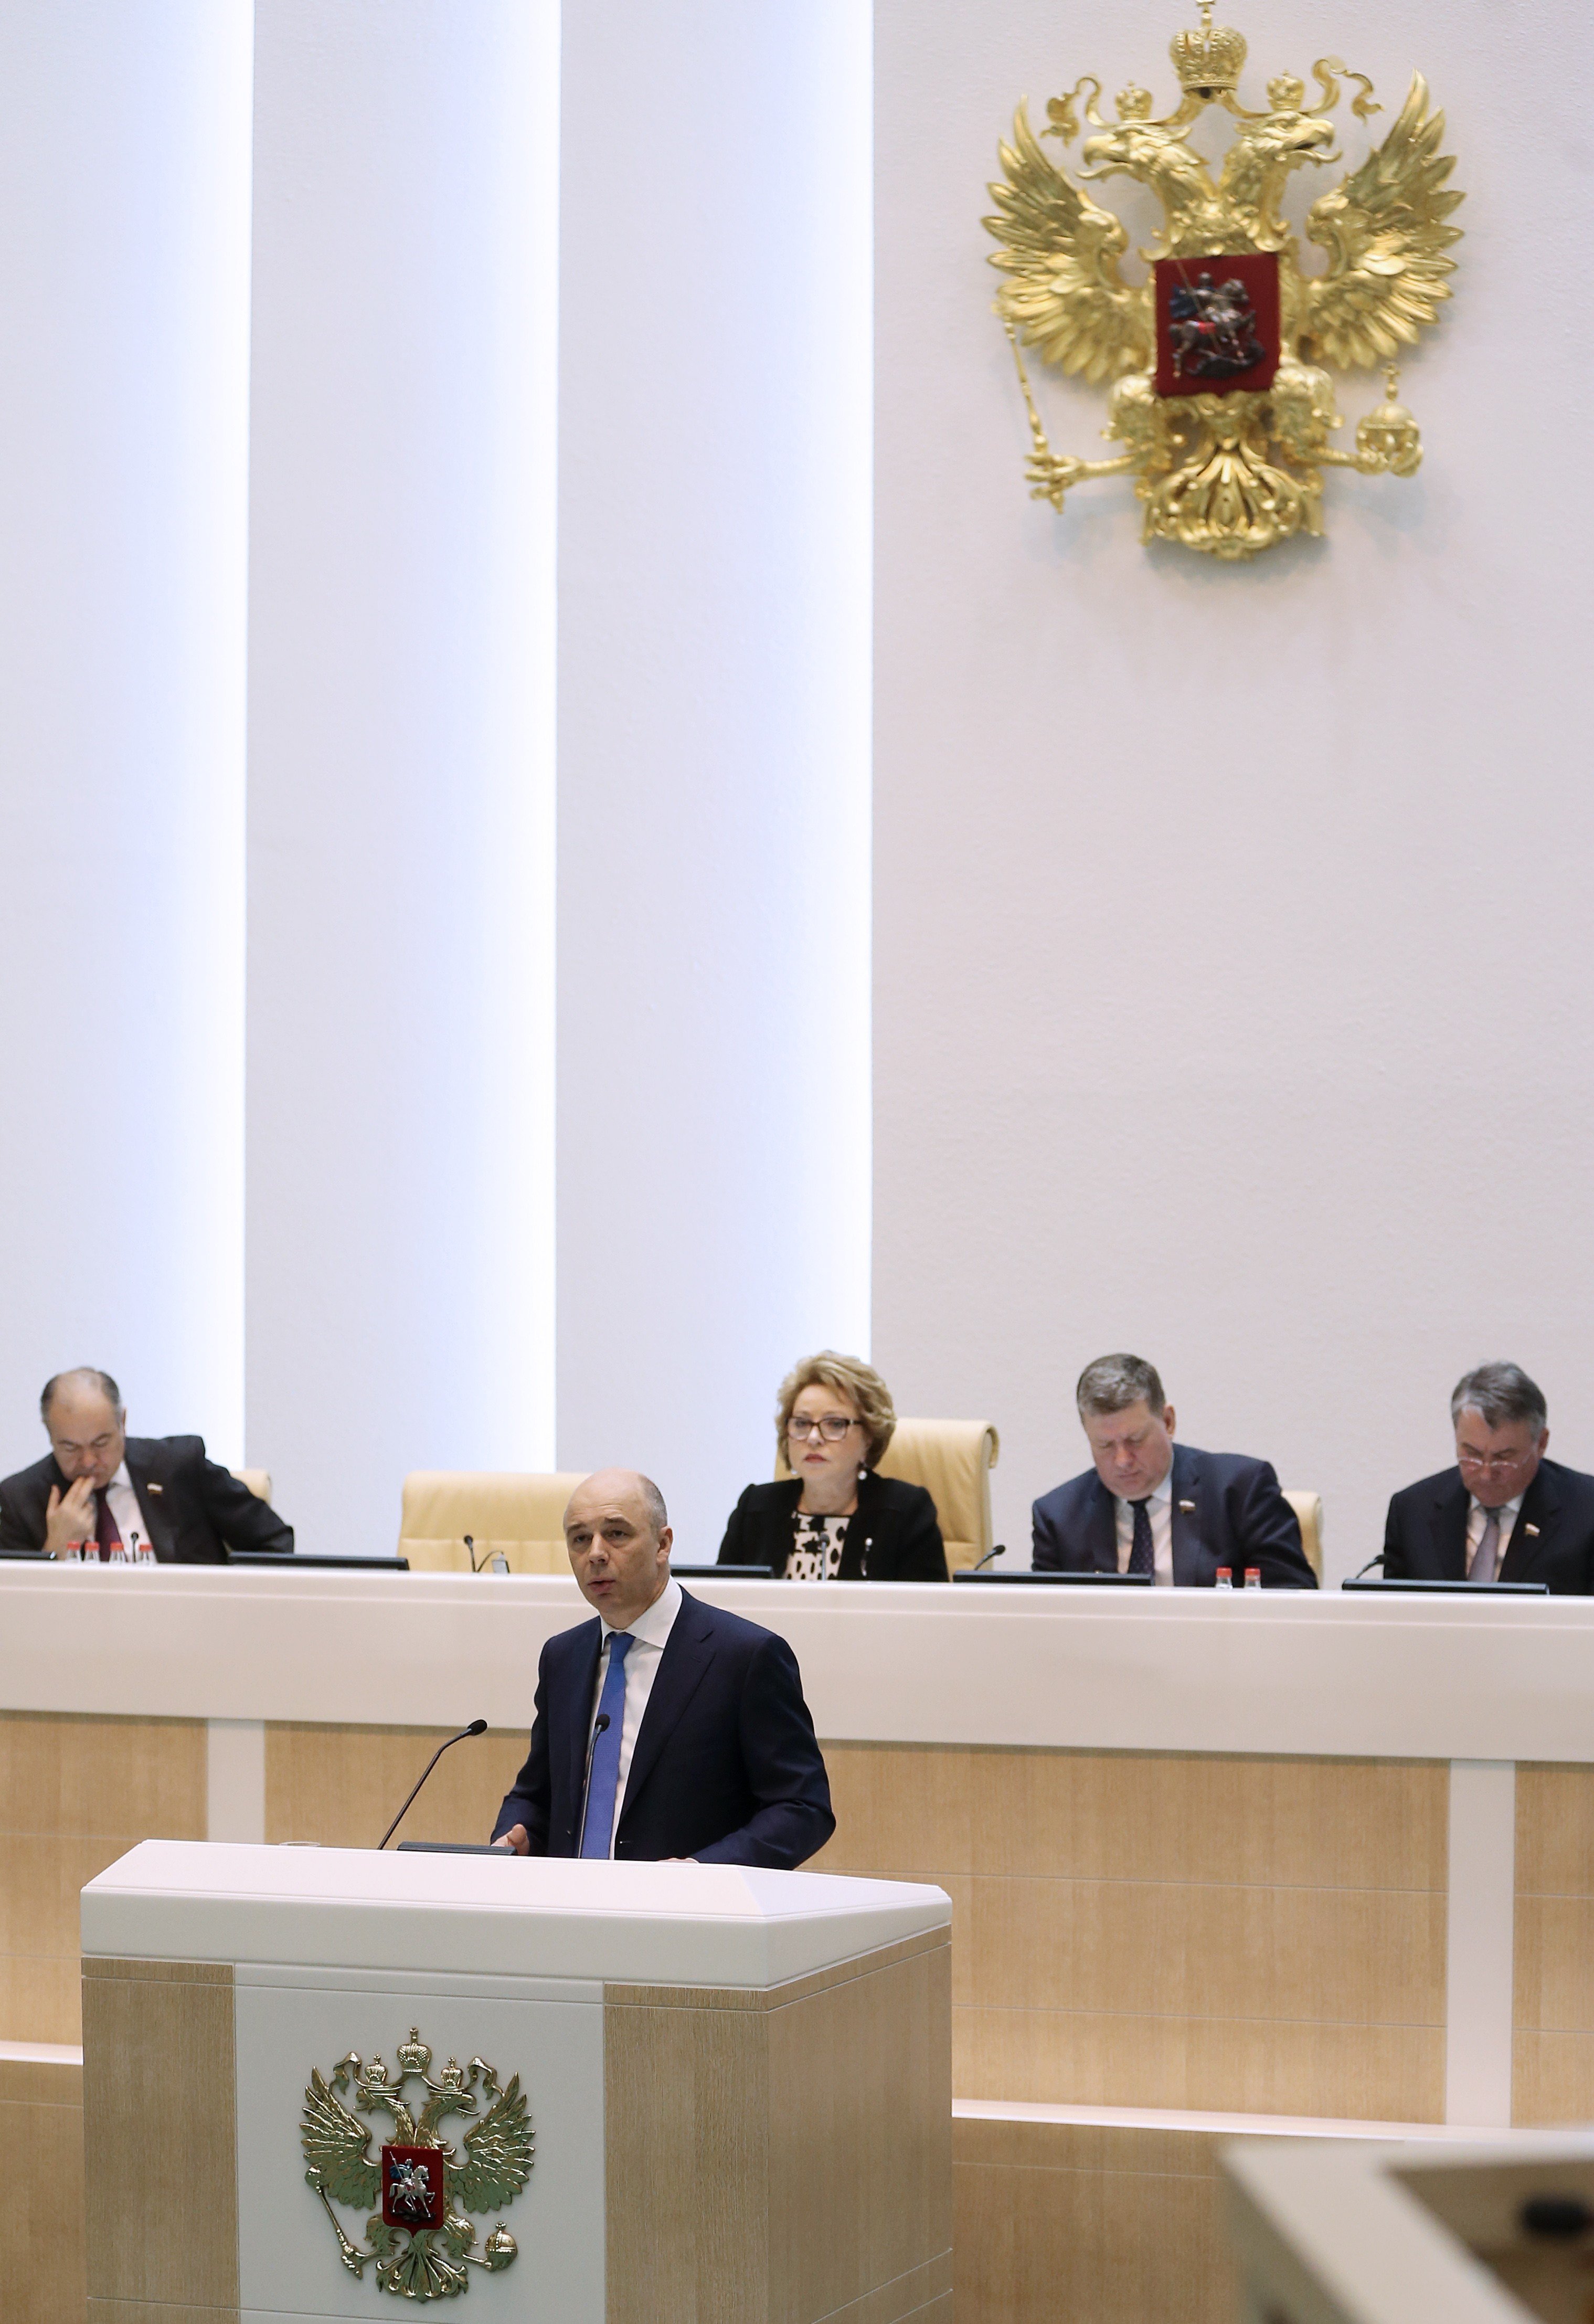 Russian Federation Council member Anton Siluanov delivers a speech as Russian Federation Council deputy chairman Ilyas Ukhmanov, Russian Federation Council chairperson Valentina Matviyenko, Russian Federation Council deputy chairmen Evgeny Bushmin and Yuri Vorobyov (L to R, background) look on at a plenary meeting of the Russian Federation Council on Jan. 28, 2015. (Pitalev Ilya—ITAR-TASS Photo/Corbis)